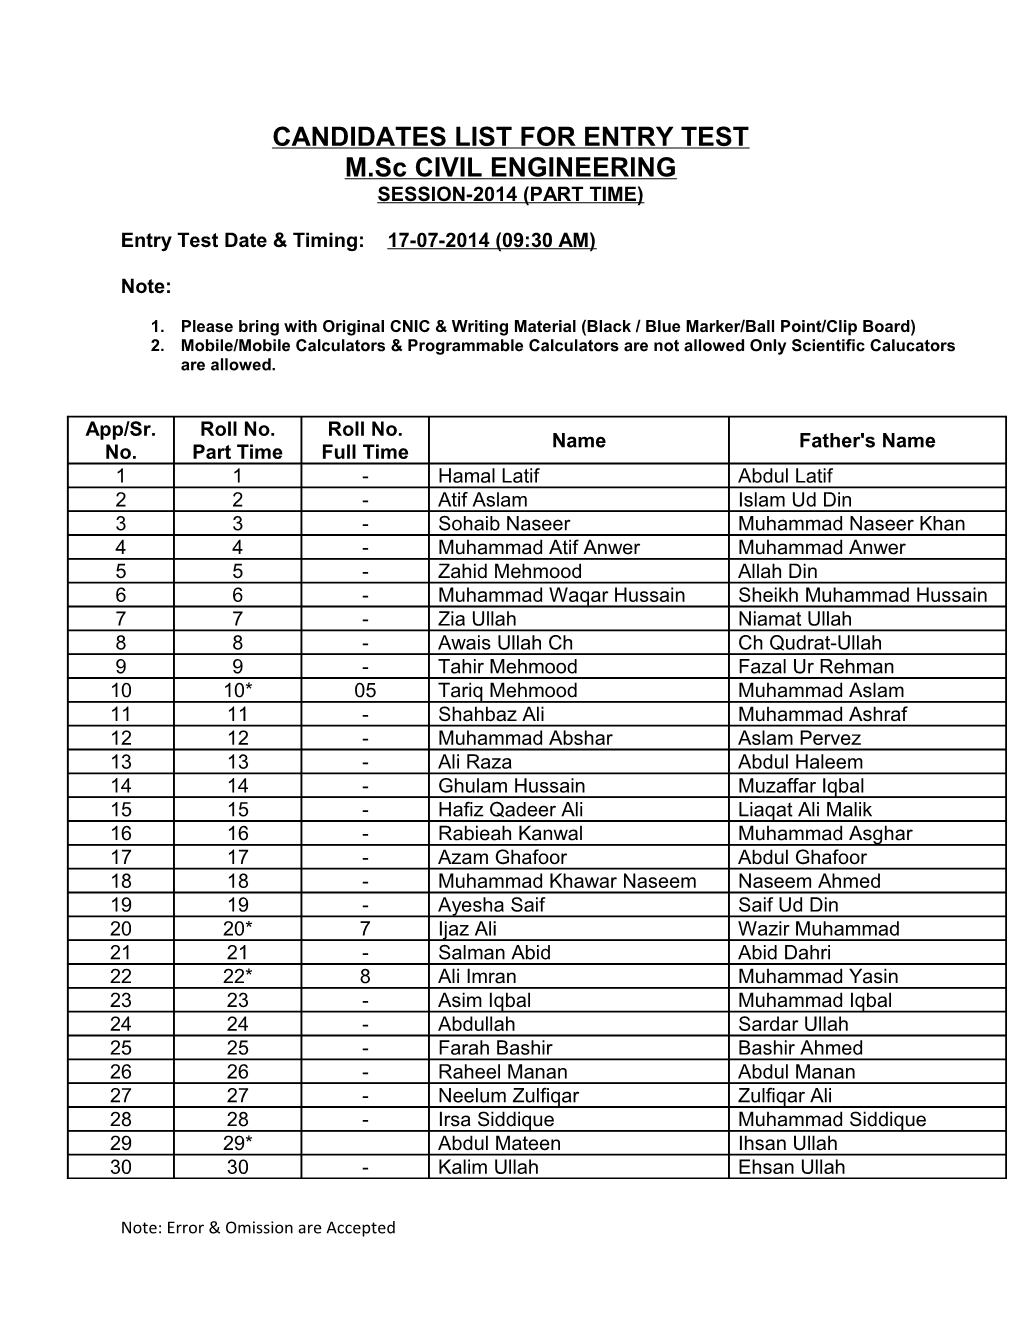 Candidates List for Entry Test